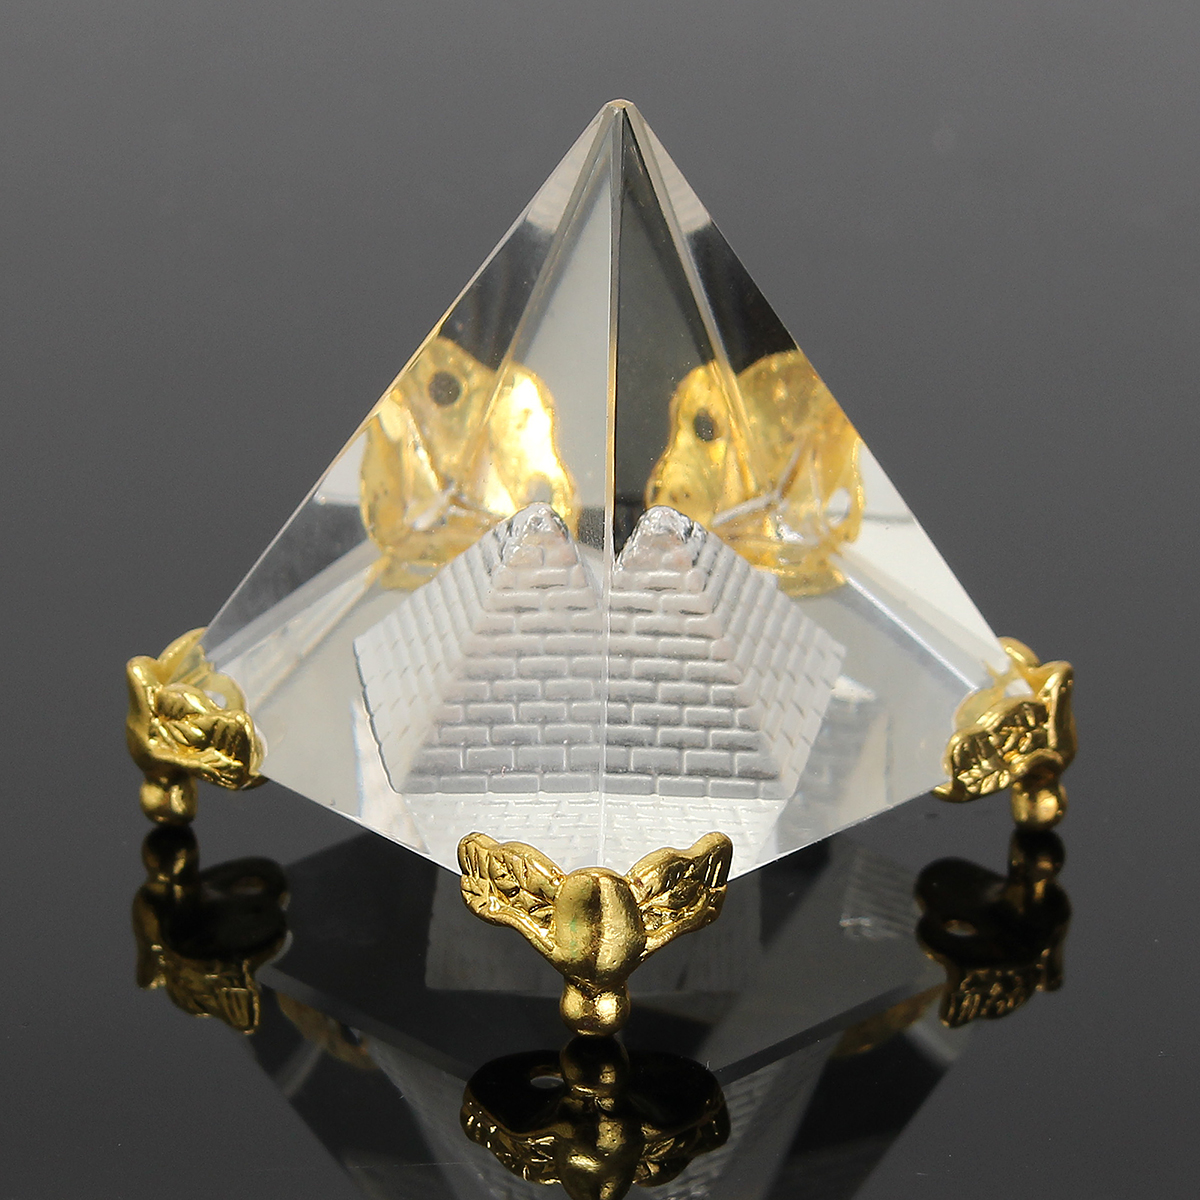 

Small Feng Shui Egypt Egyptian Crystal Clear Pyramid REIKI Healing Prizms Room Decorations